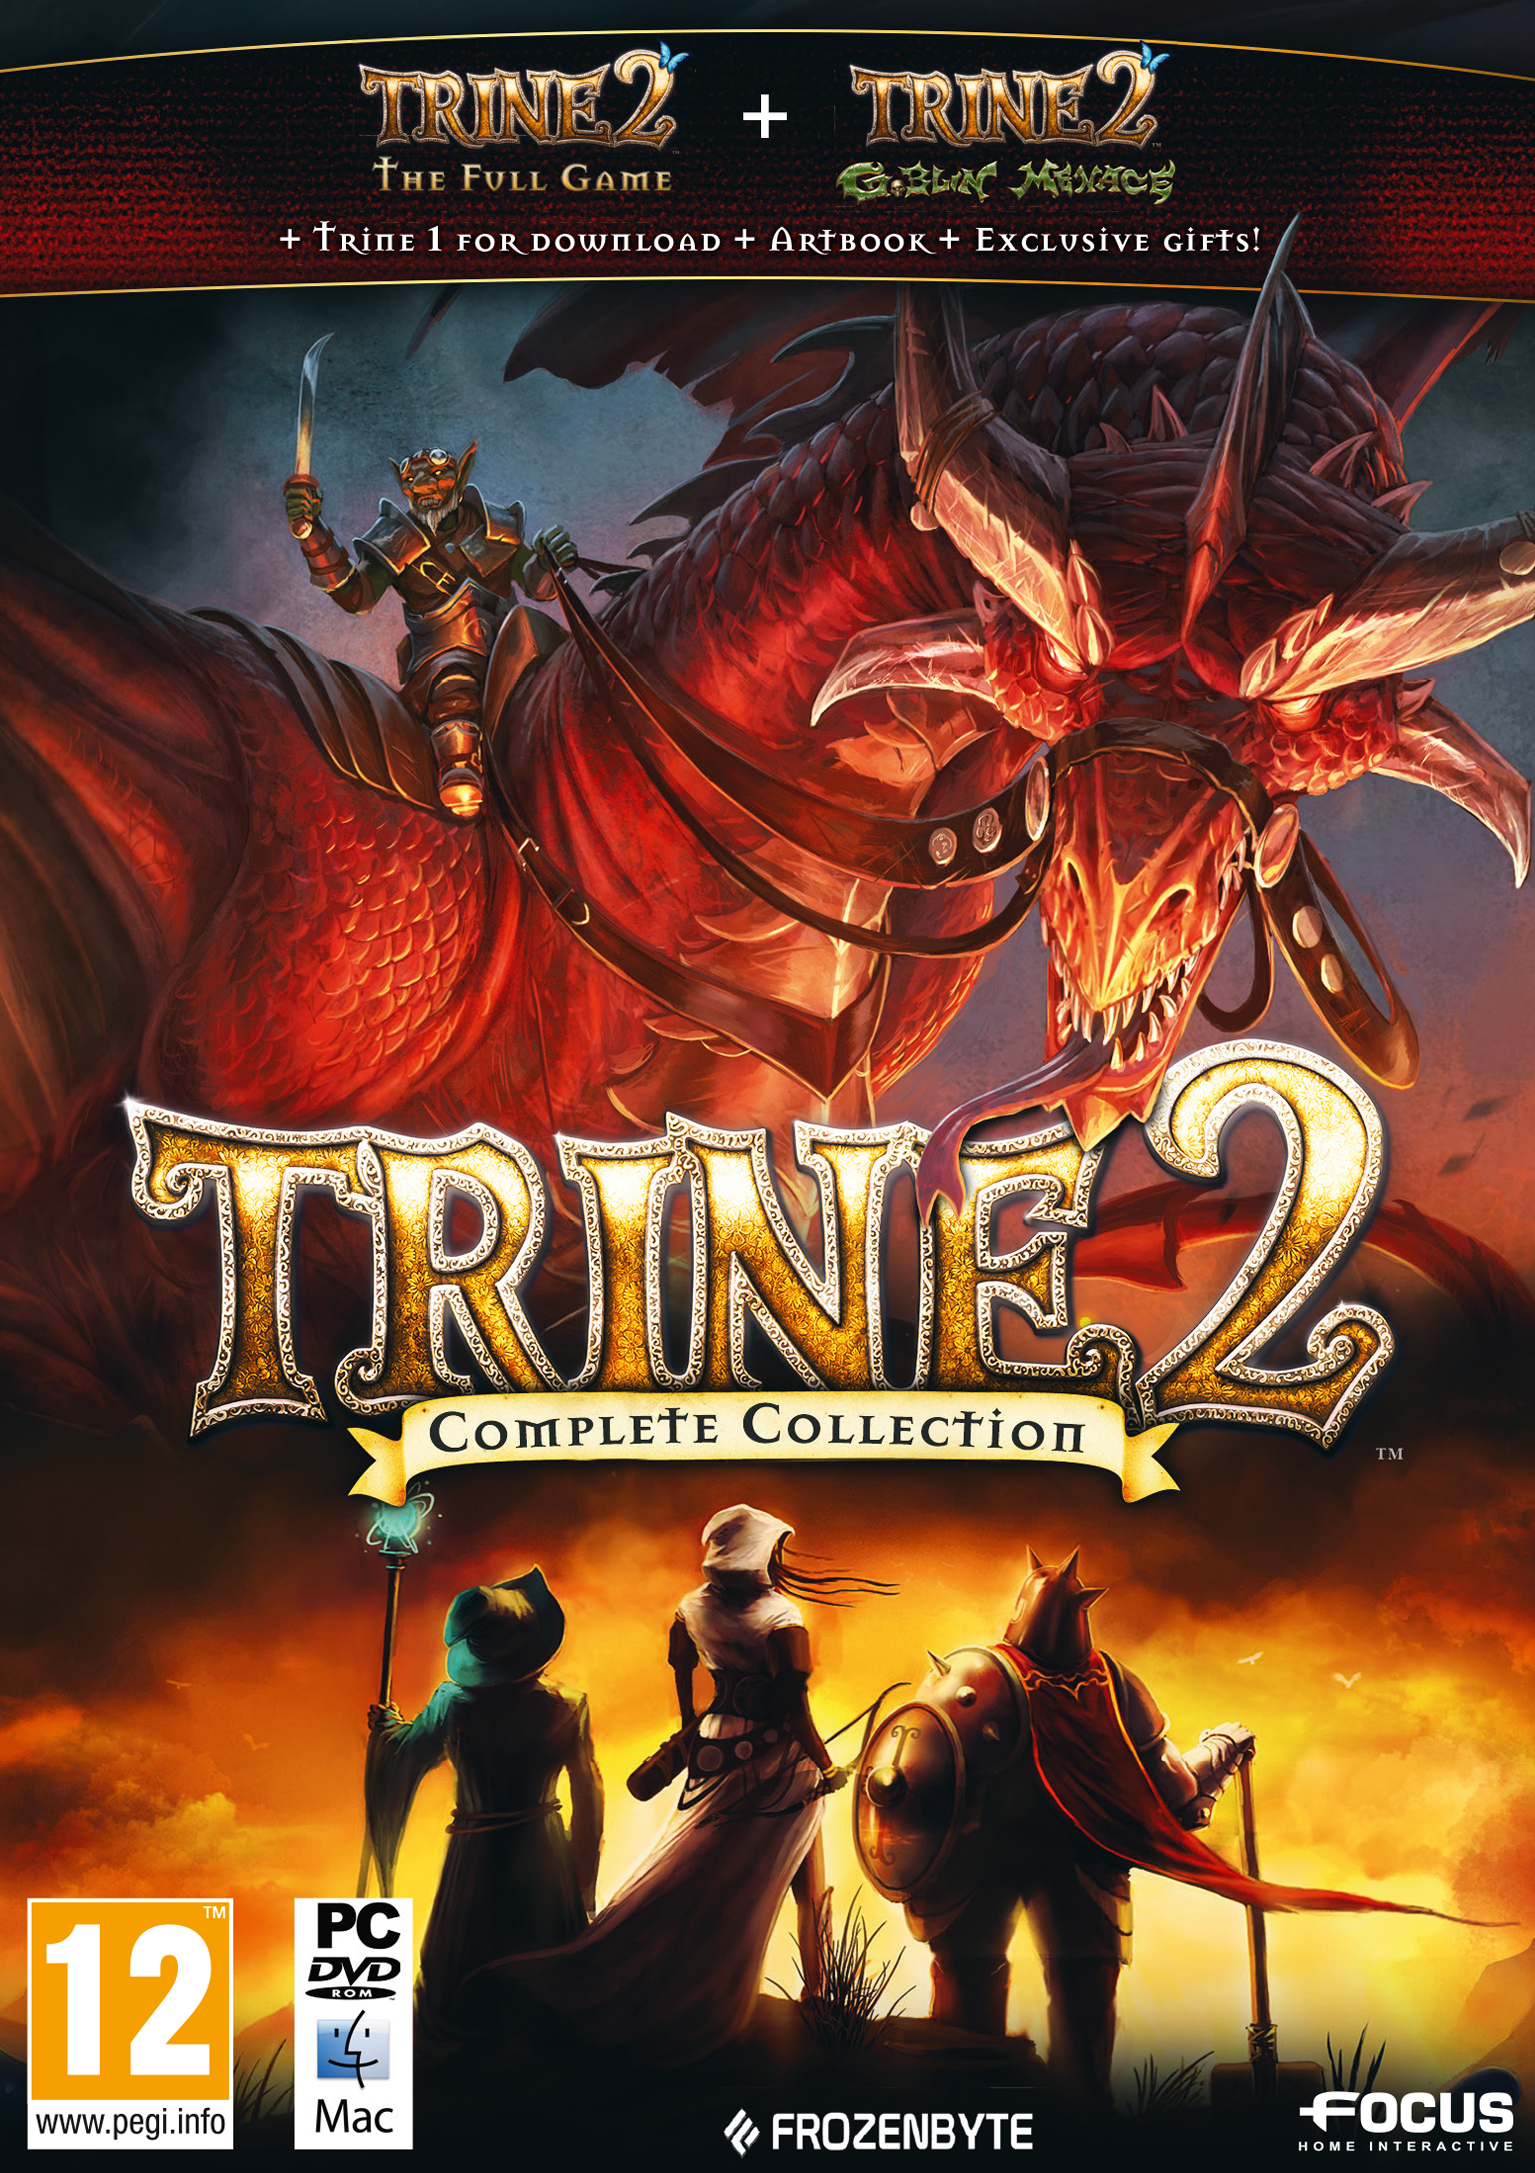 SALTOO Trine 2 Complete Collection